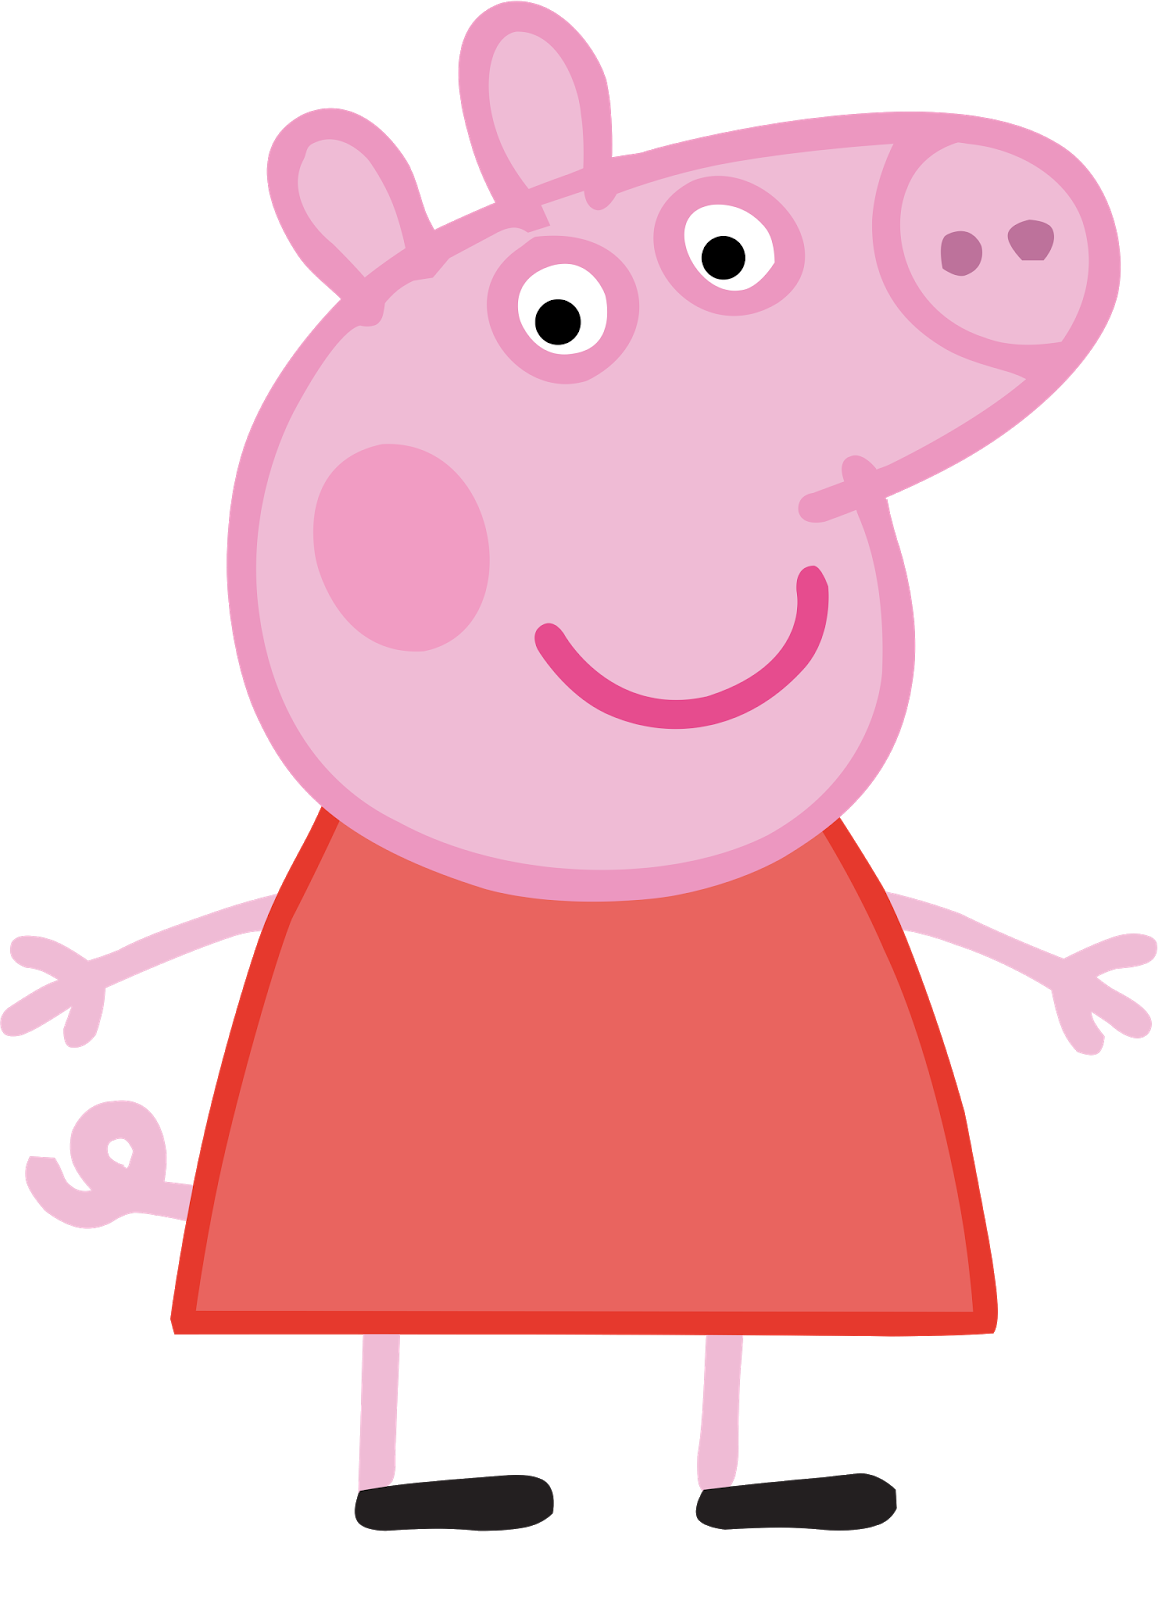 Peppa Pig PNG Clipart